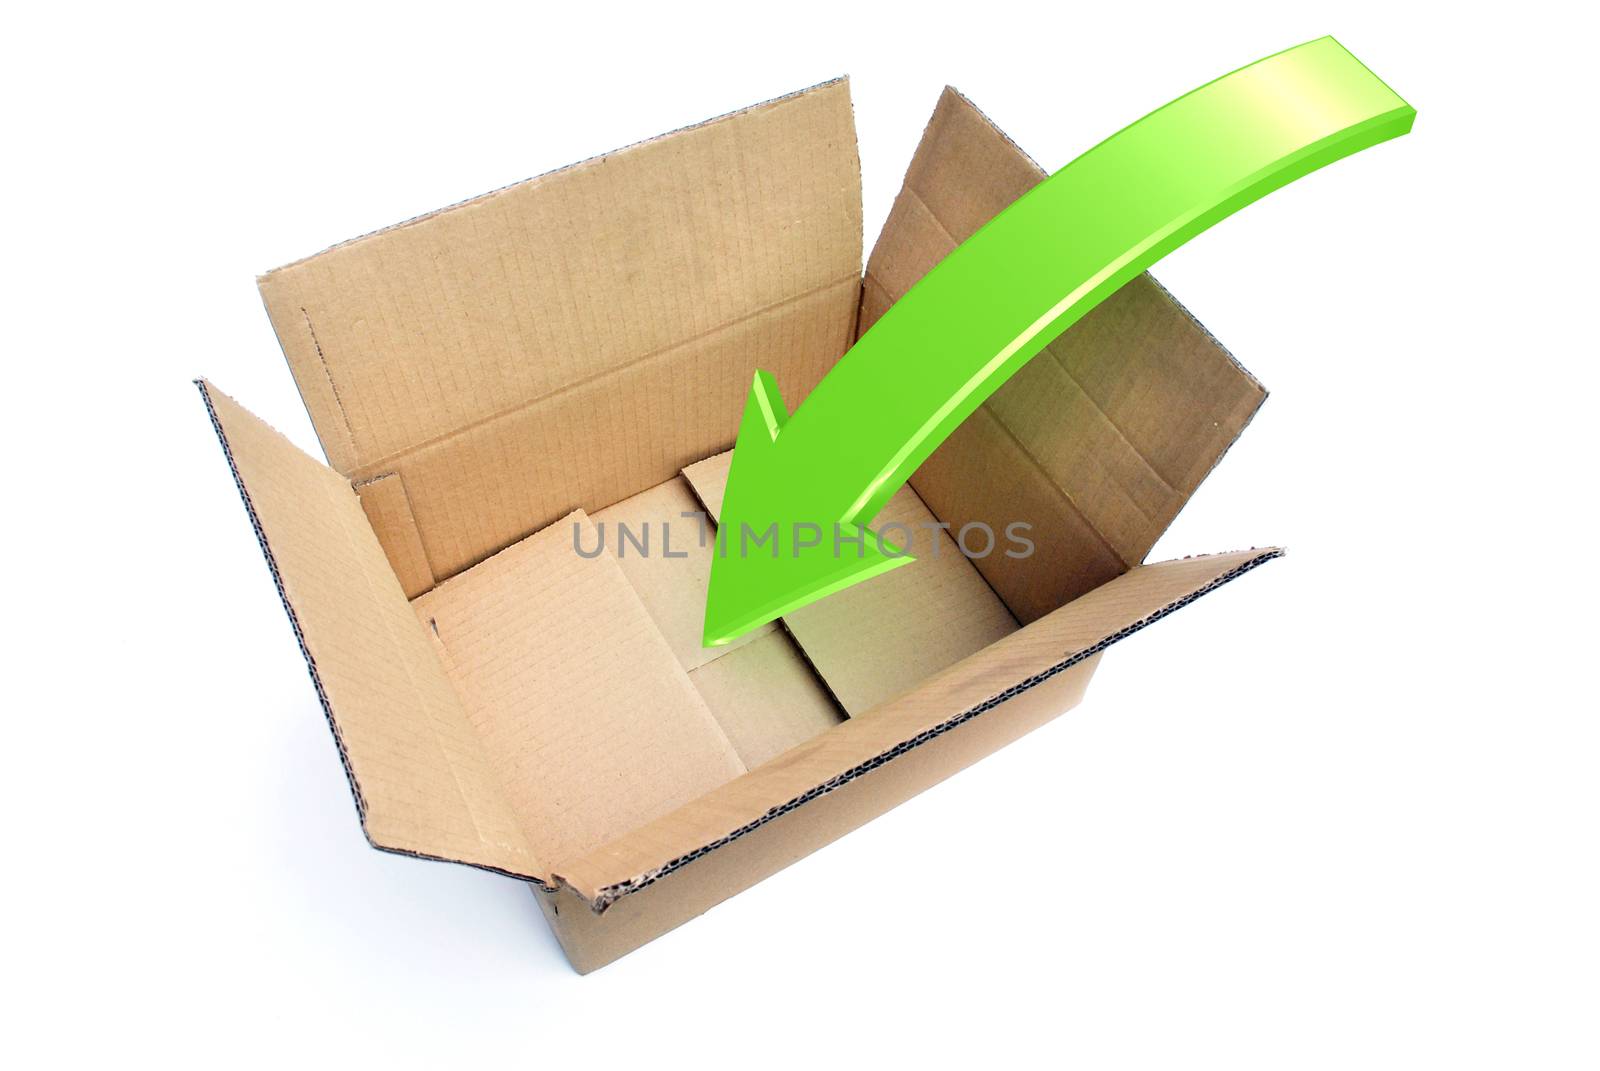 An opened box with a Rendered Arrow showing a Packing Concept